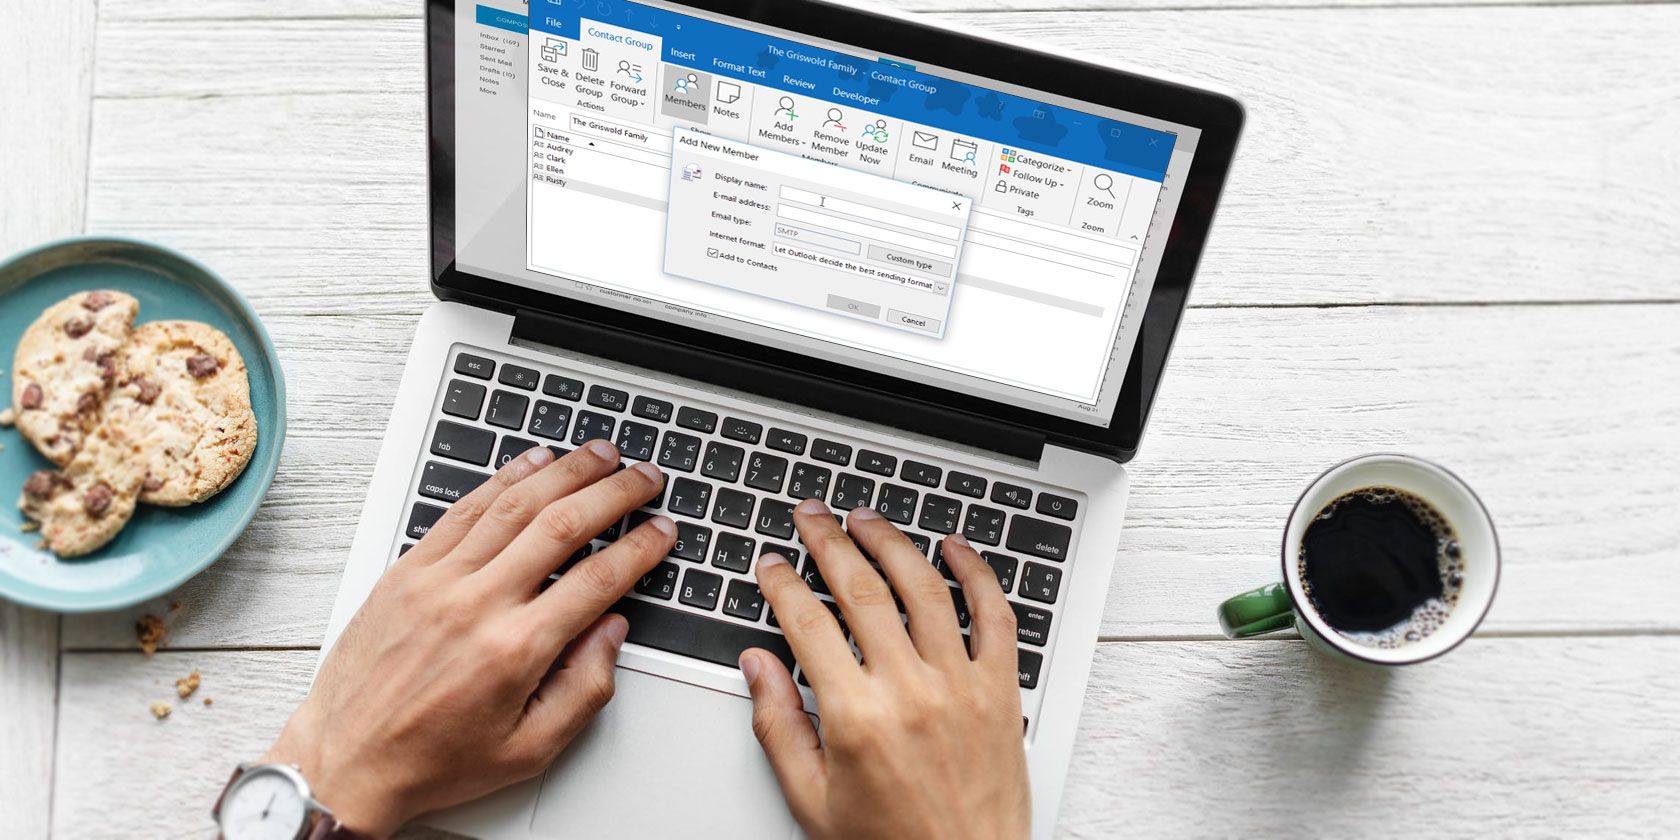 How to Create an Email Group and Distribution List in Outlook